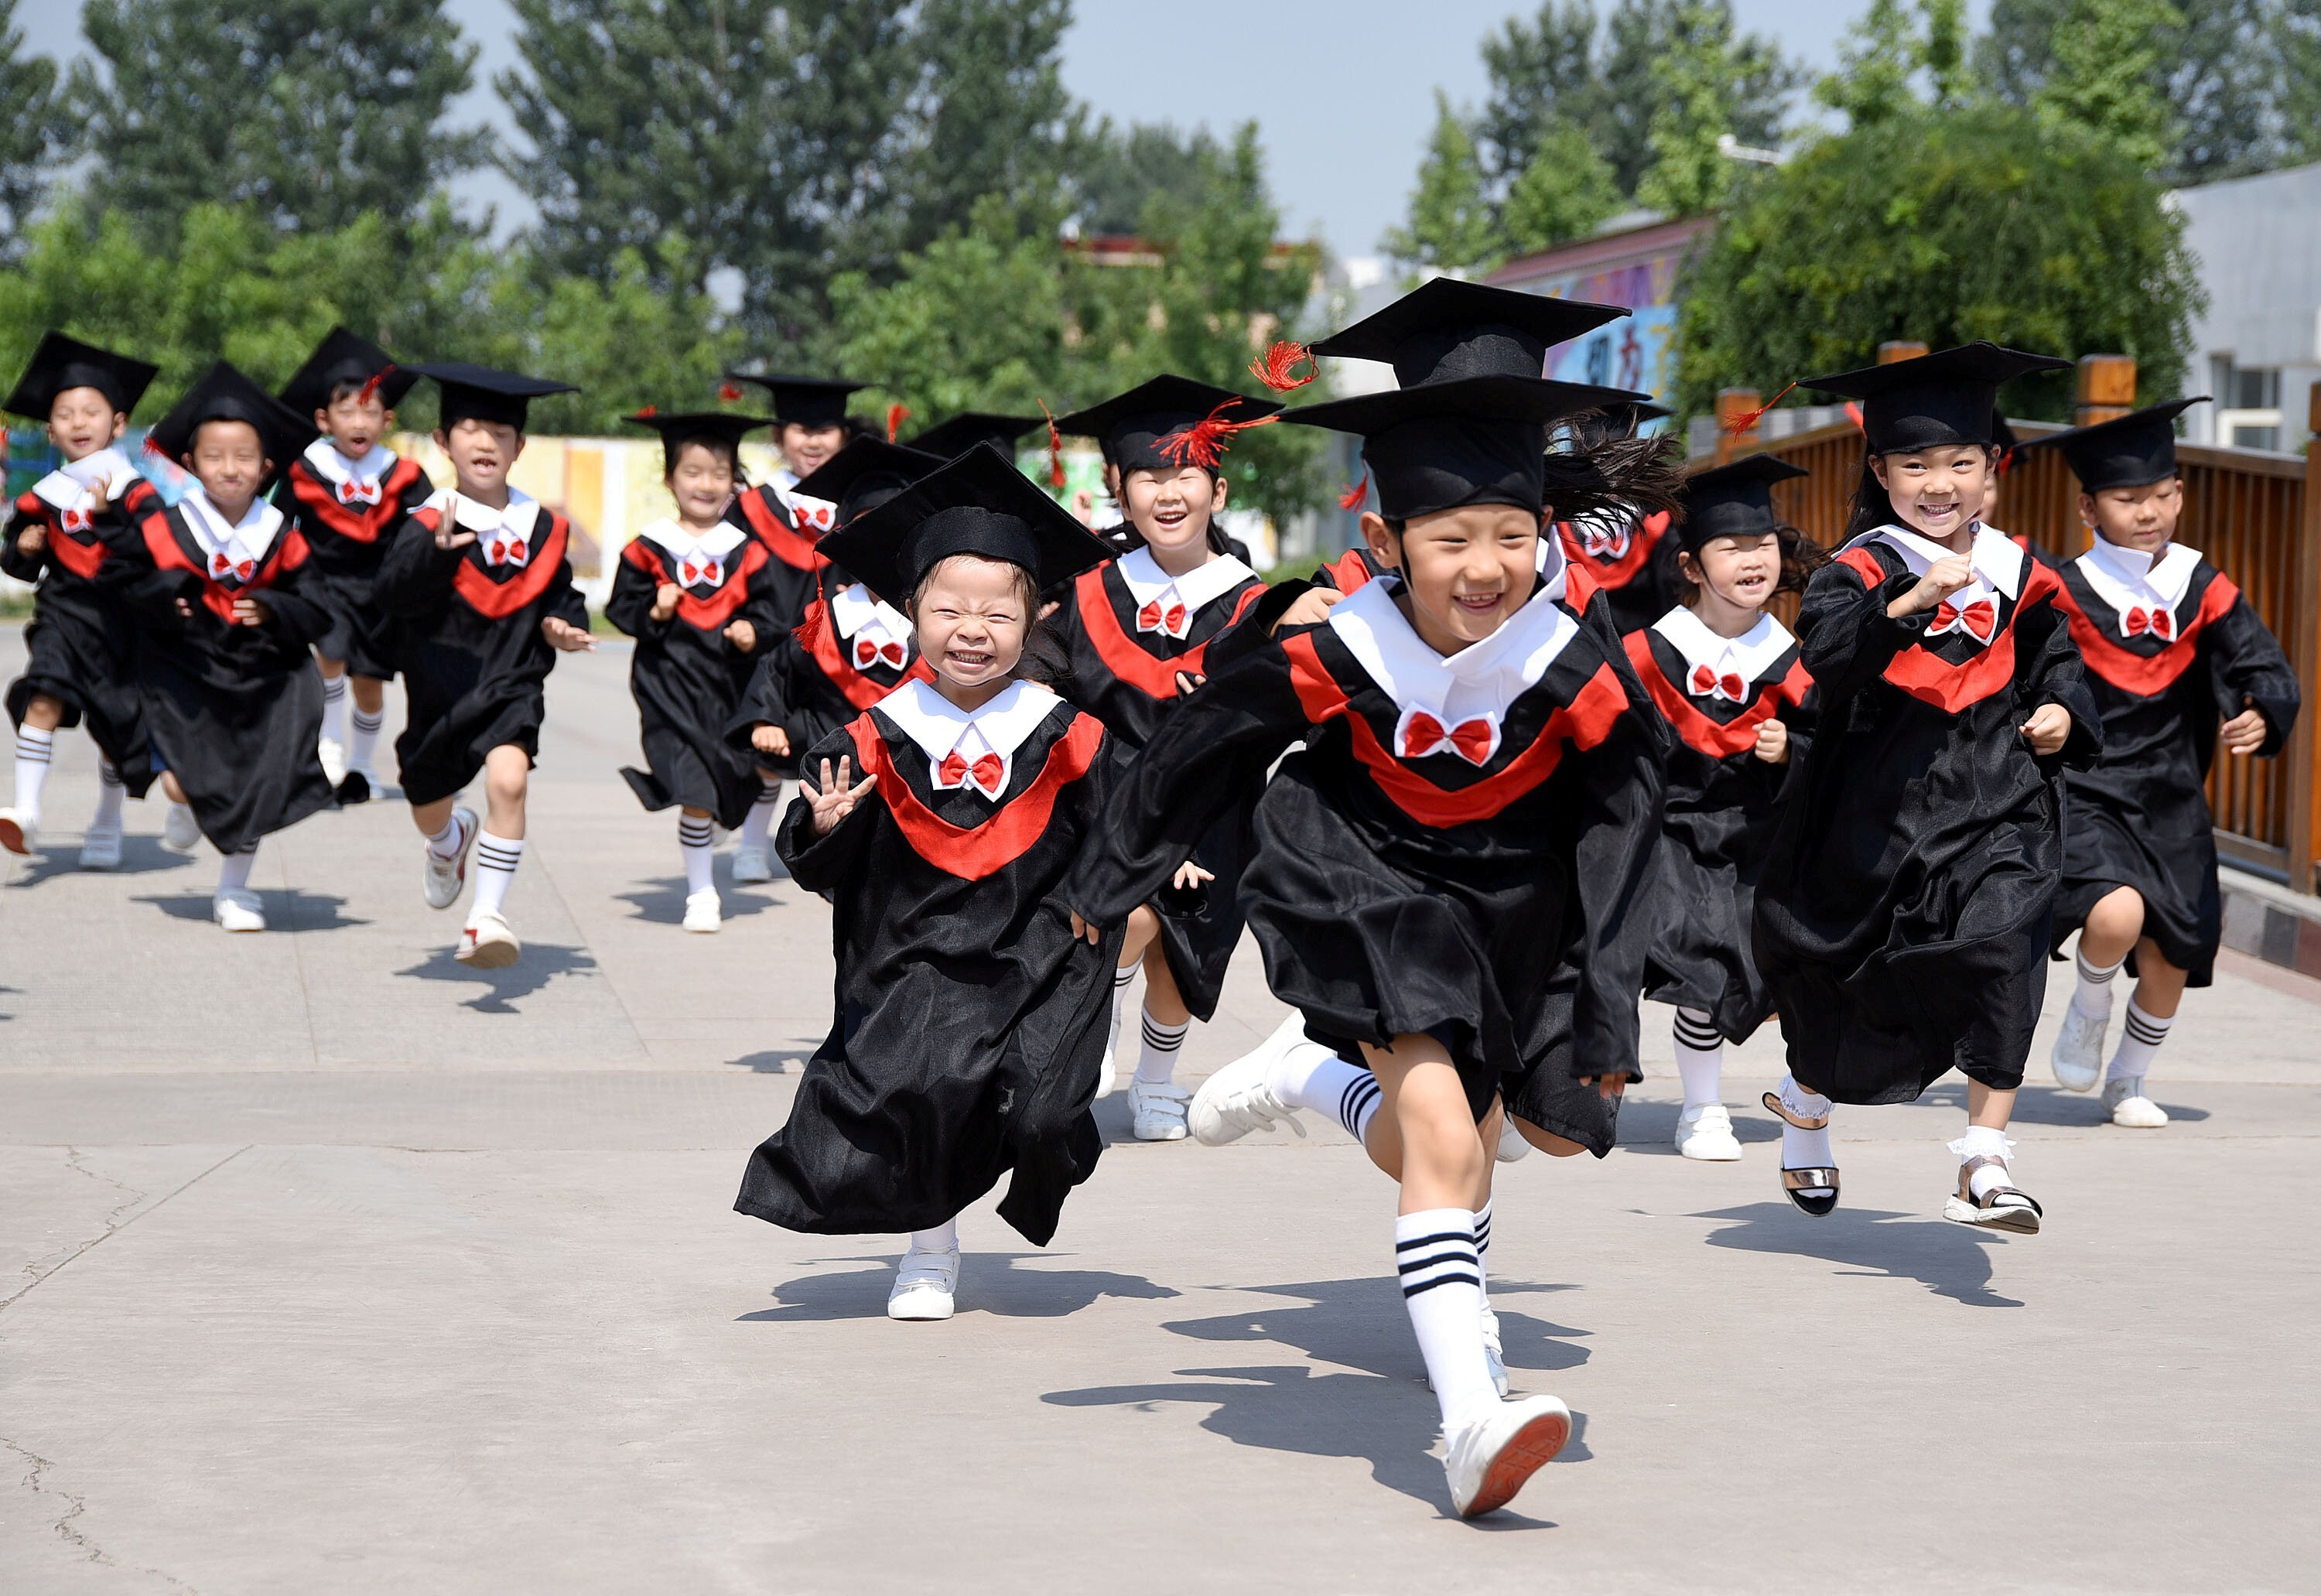 Children in gowns and mortar boards during their kindergarten graduation ceremony in Handan, Hebei province on June 20, 2017. Photo: China Daily via Reuters